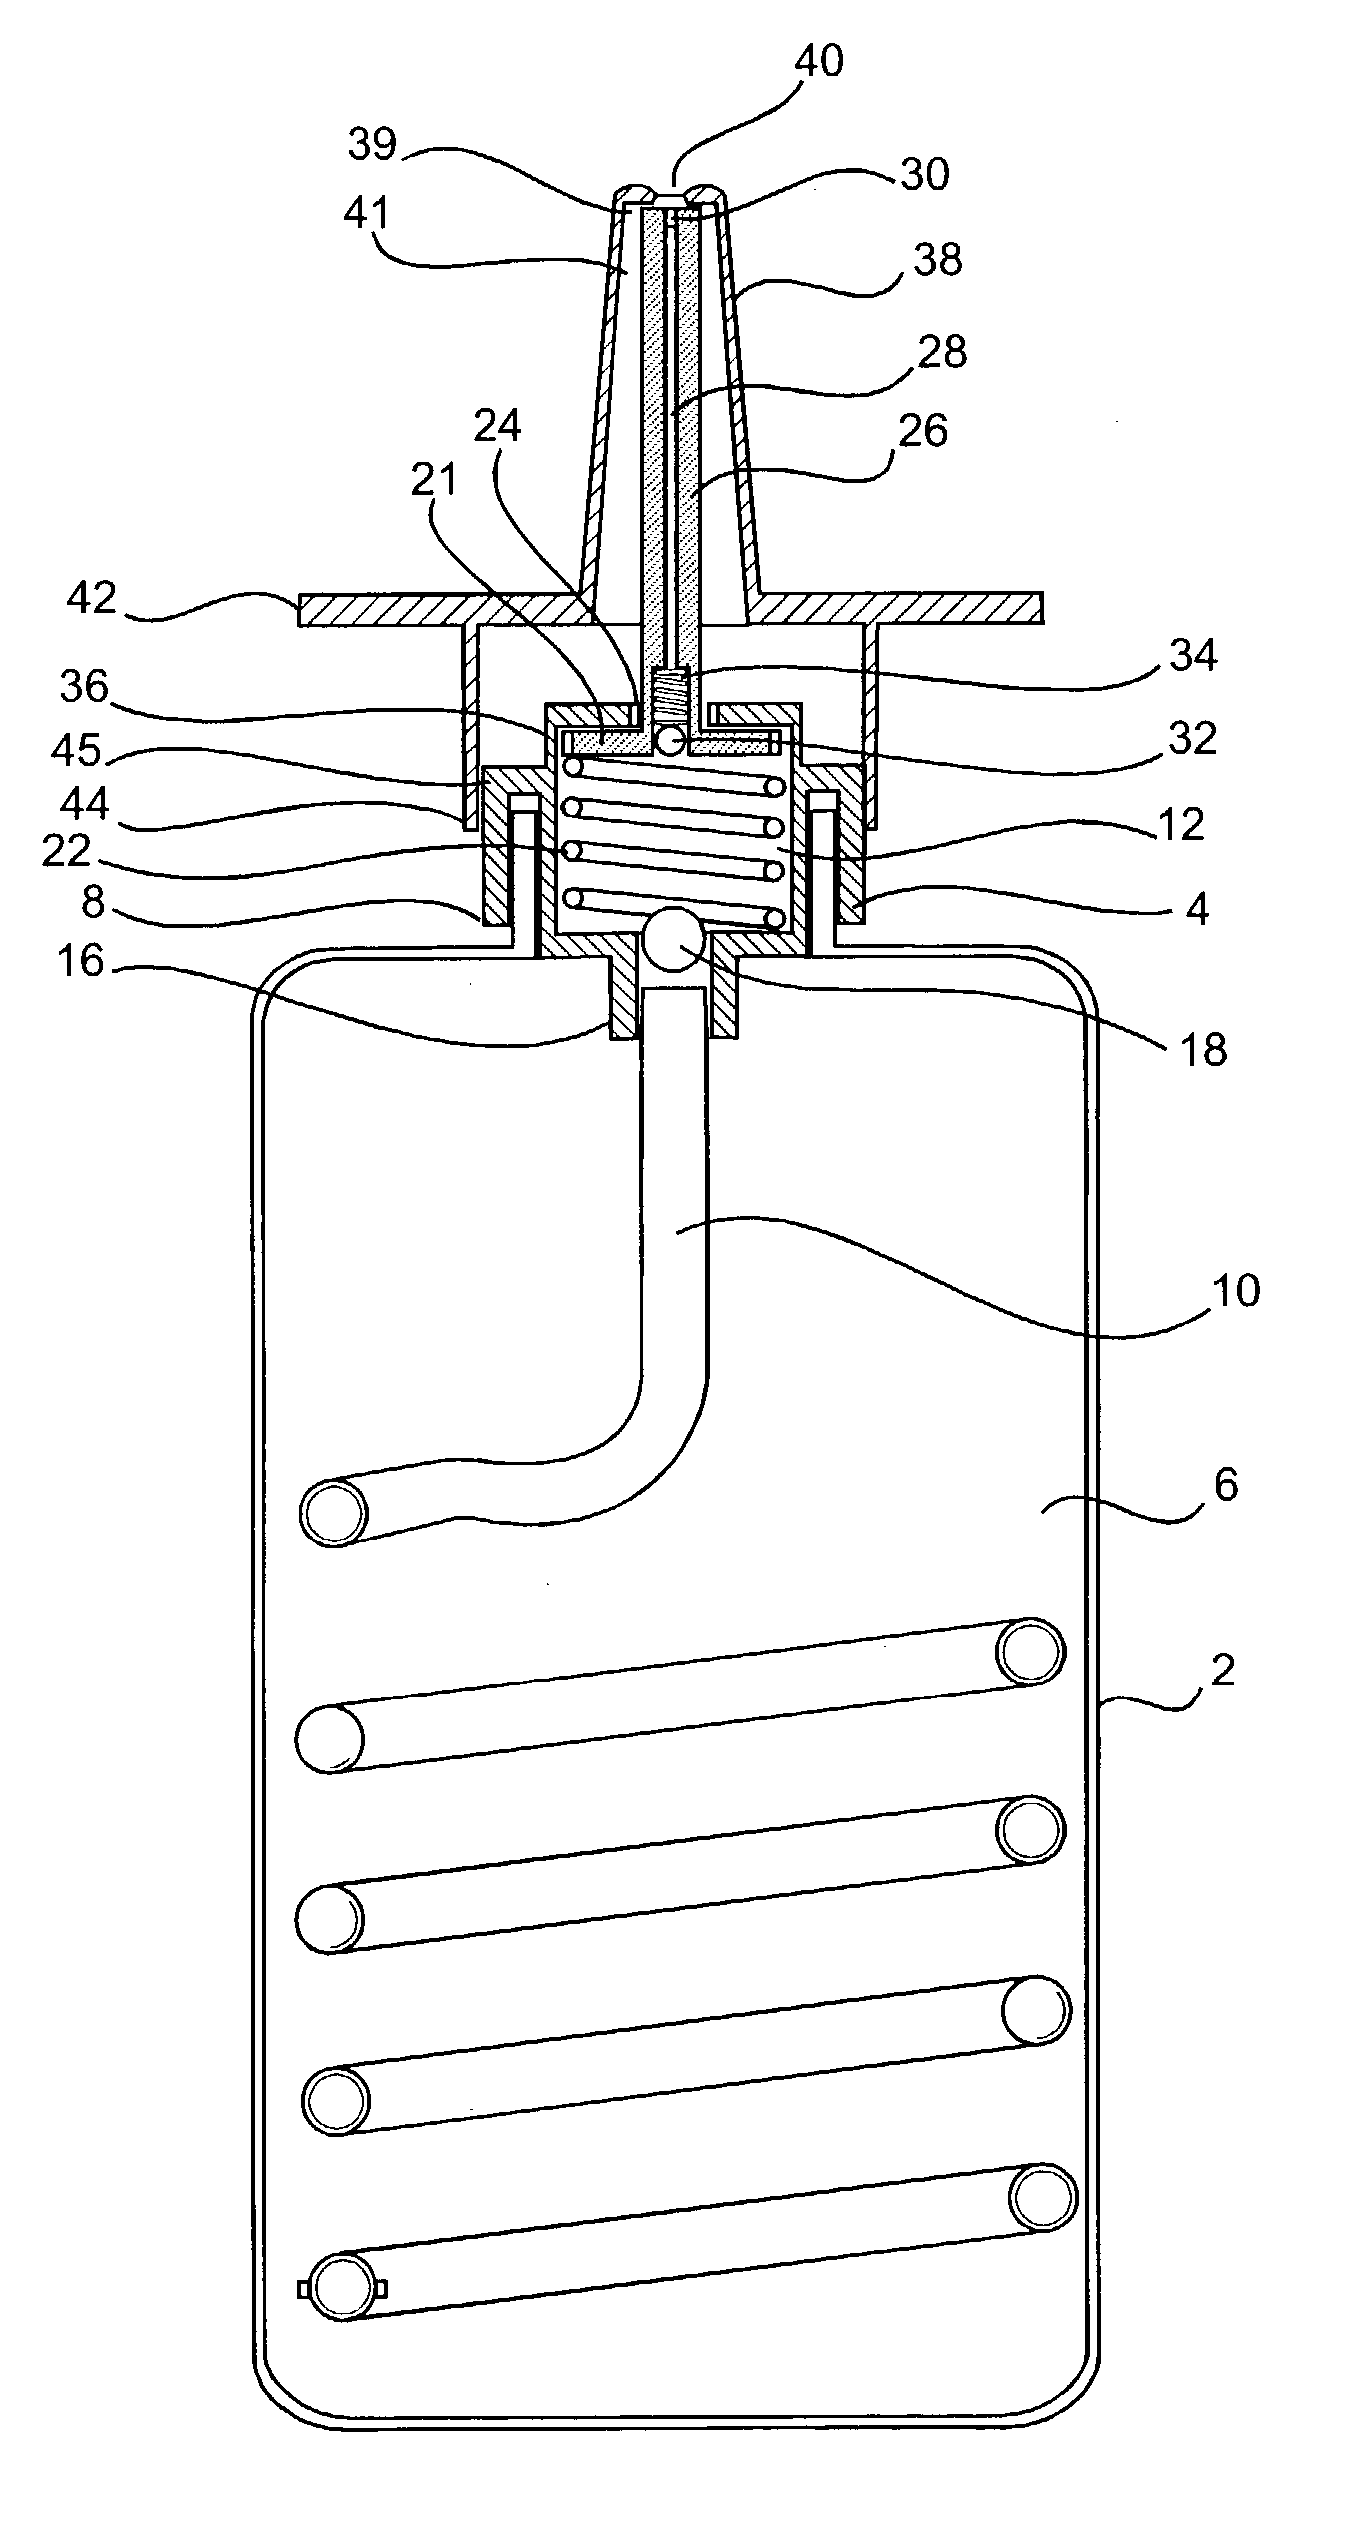 Patient controlled drug delivery device